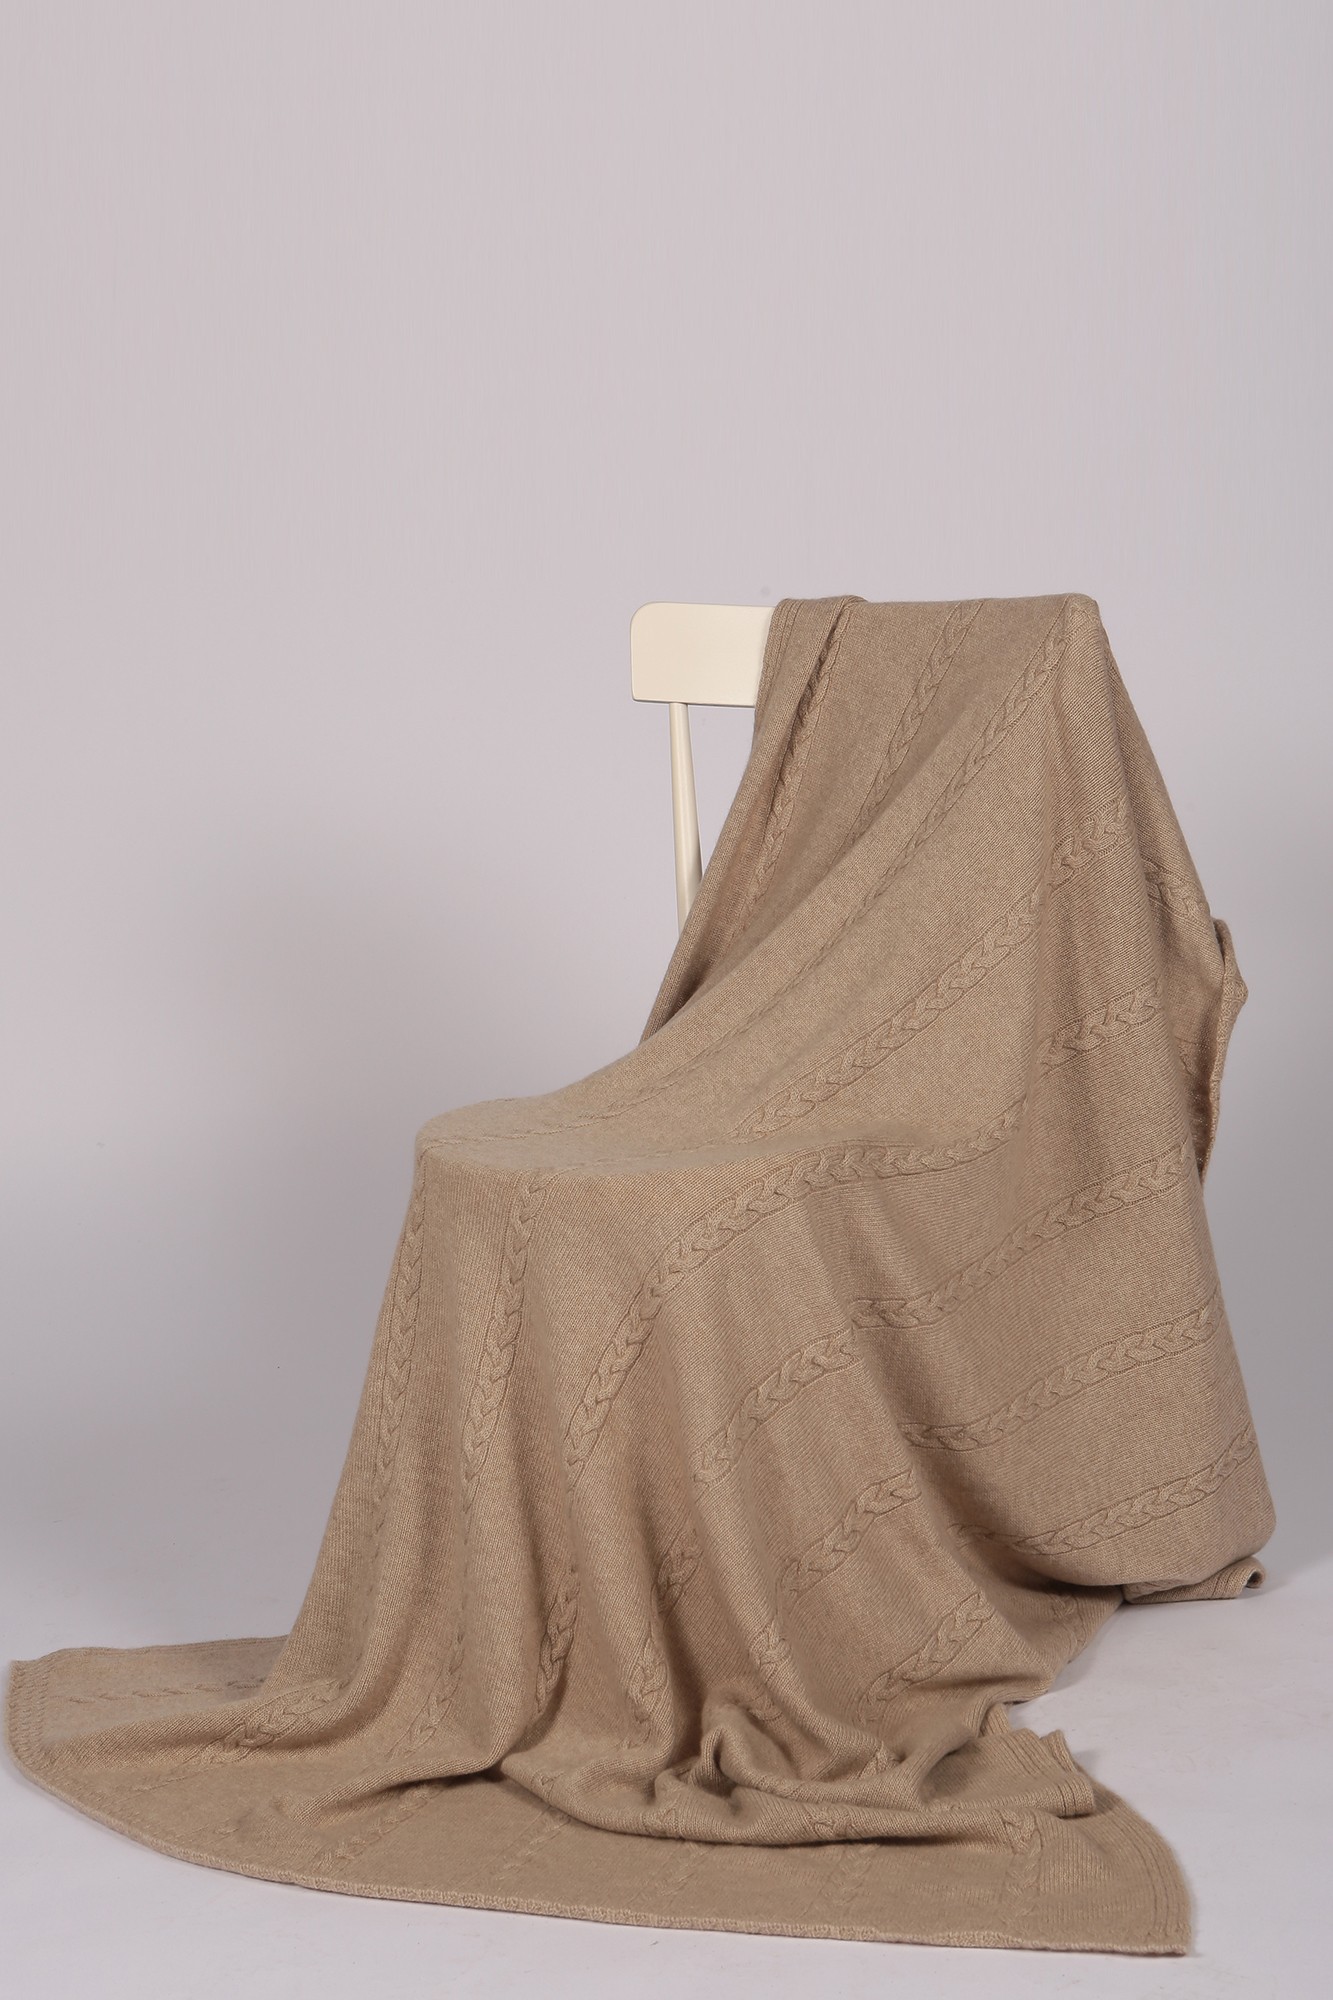 https://static.italyincashmere.com/5475/luxury-pure-cashmere-plain-and-cable-knit-blanket-throw.jpg